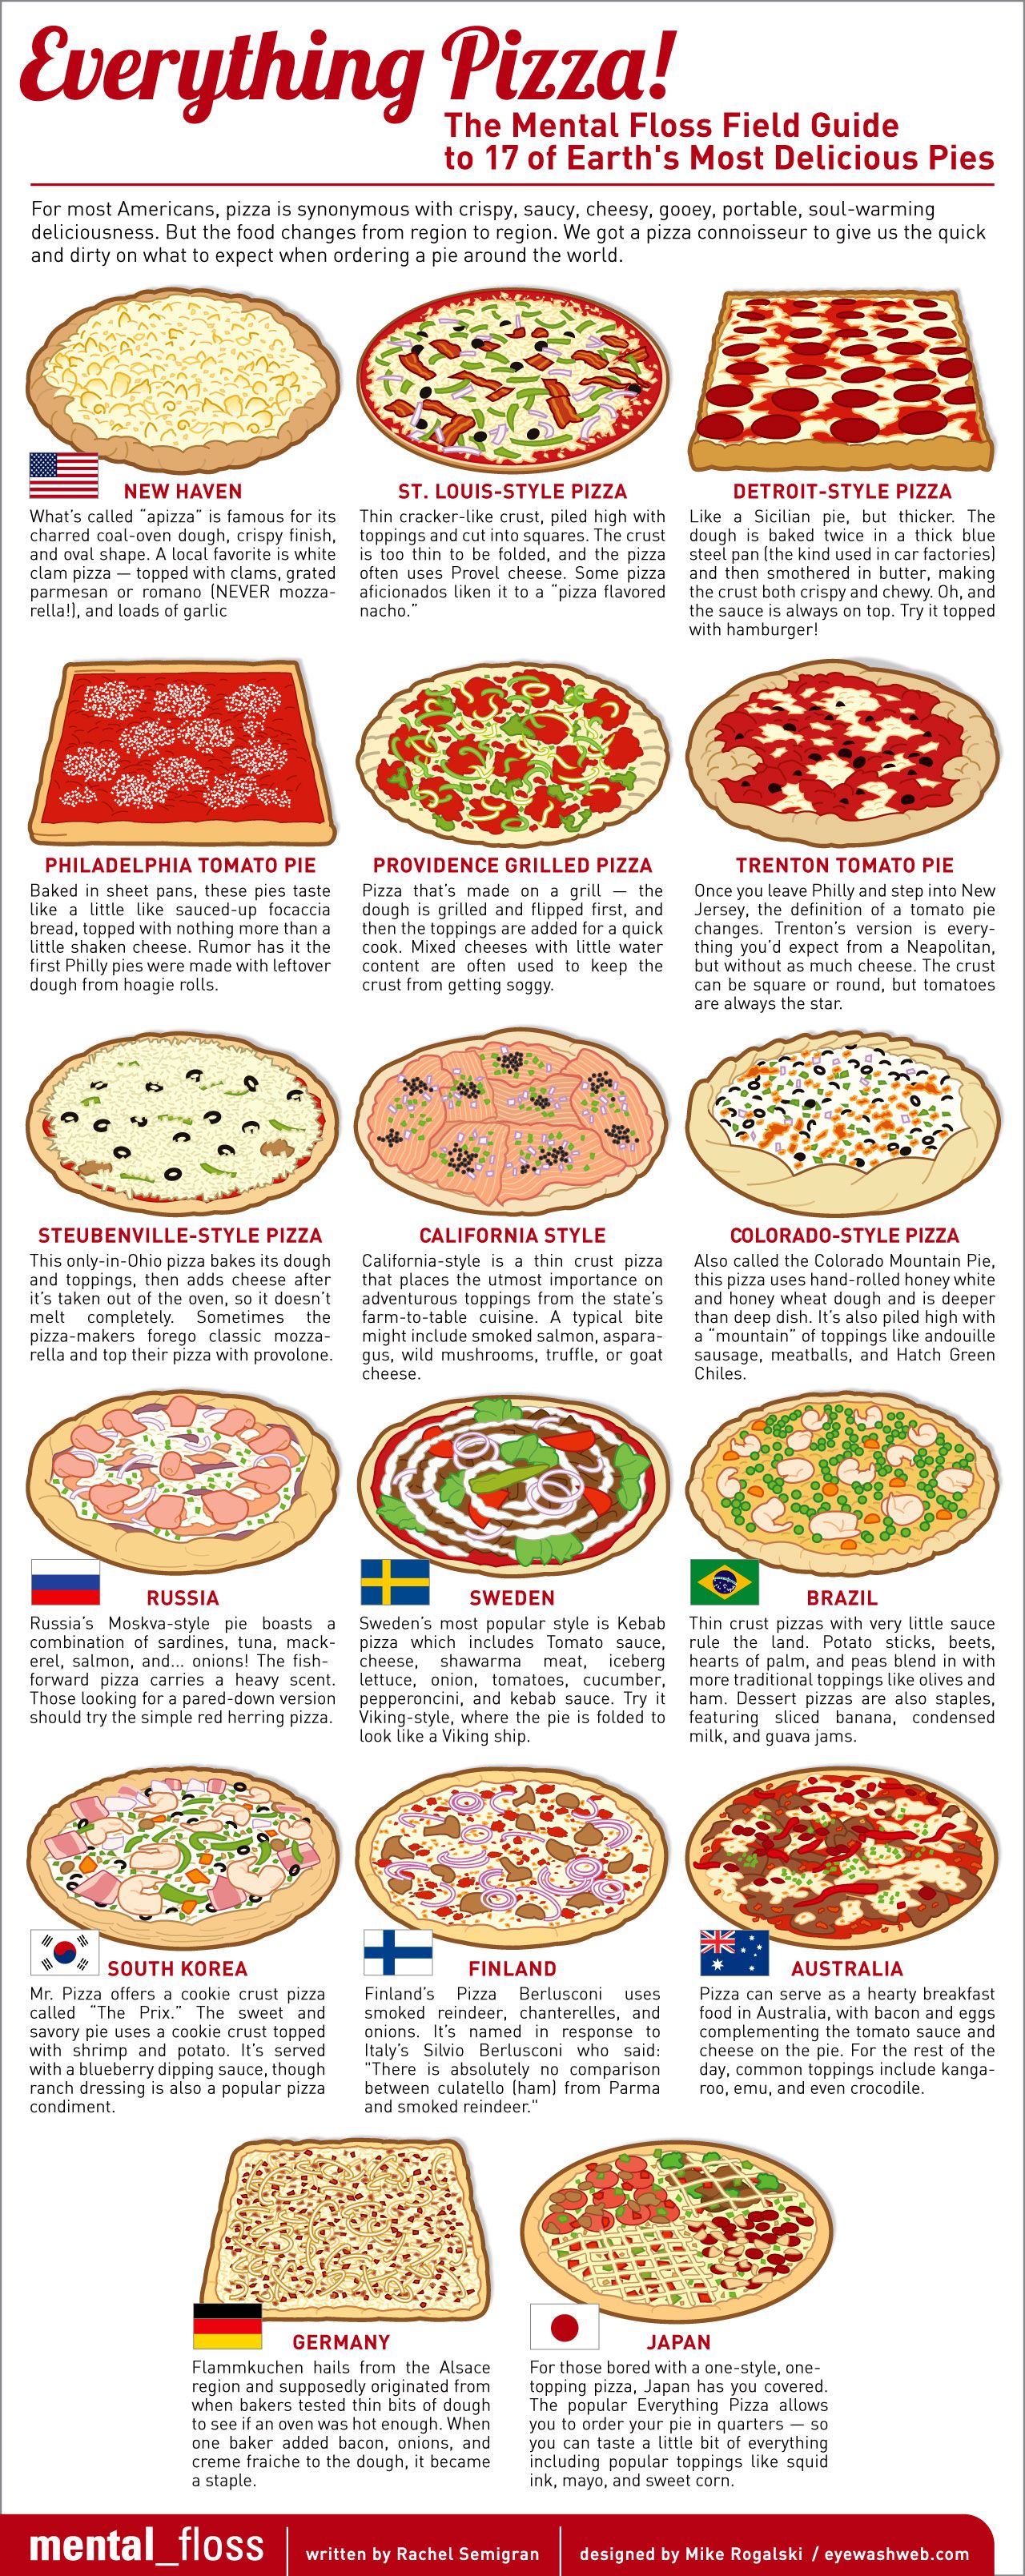 Everything Pizza 17 of Earth's Most Delicious Pies